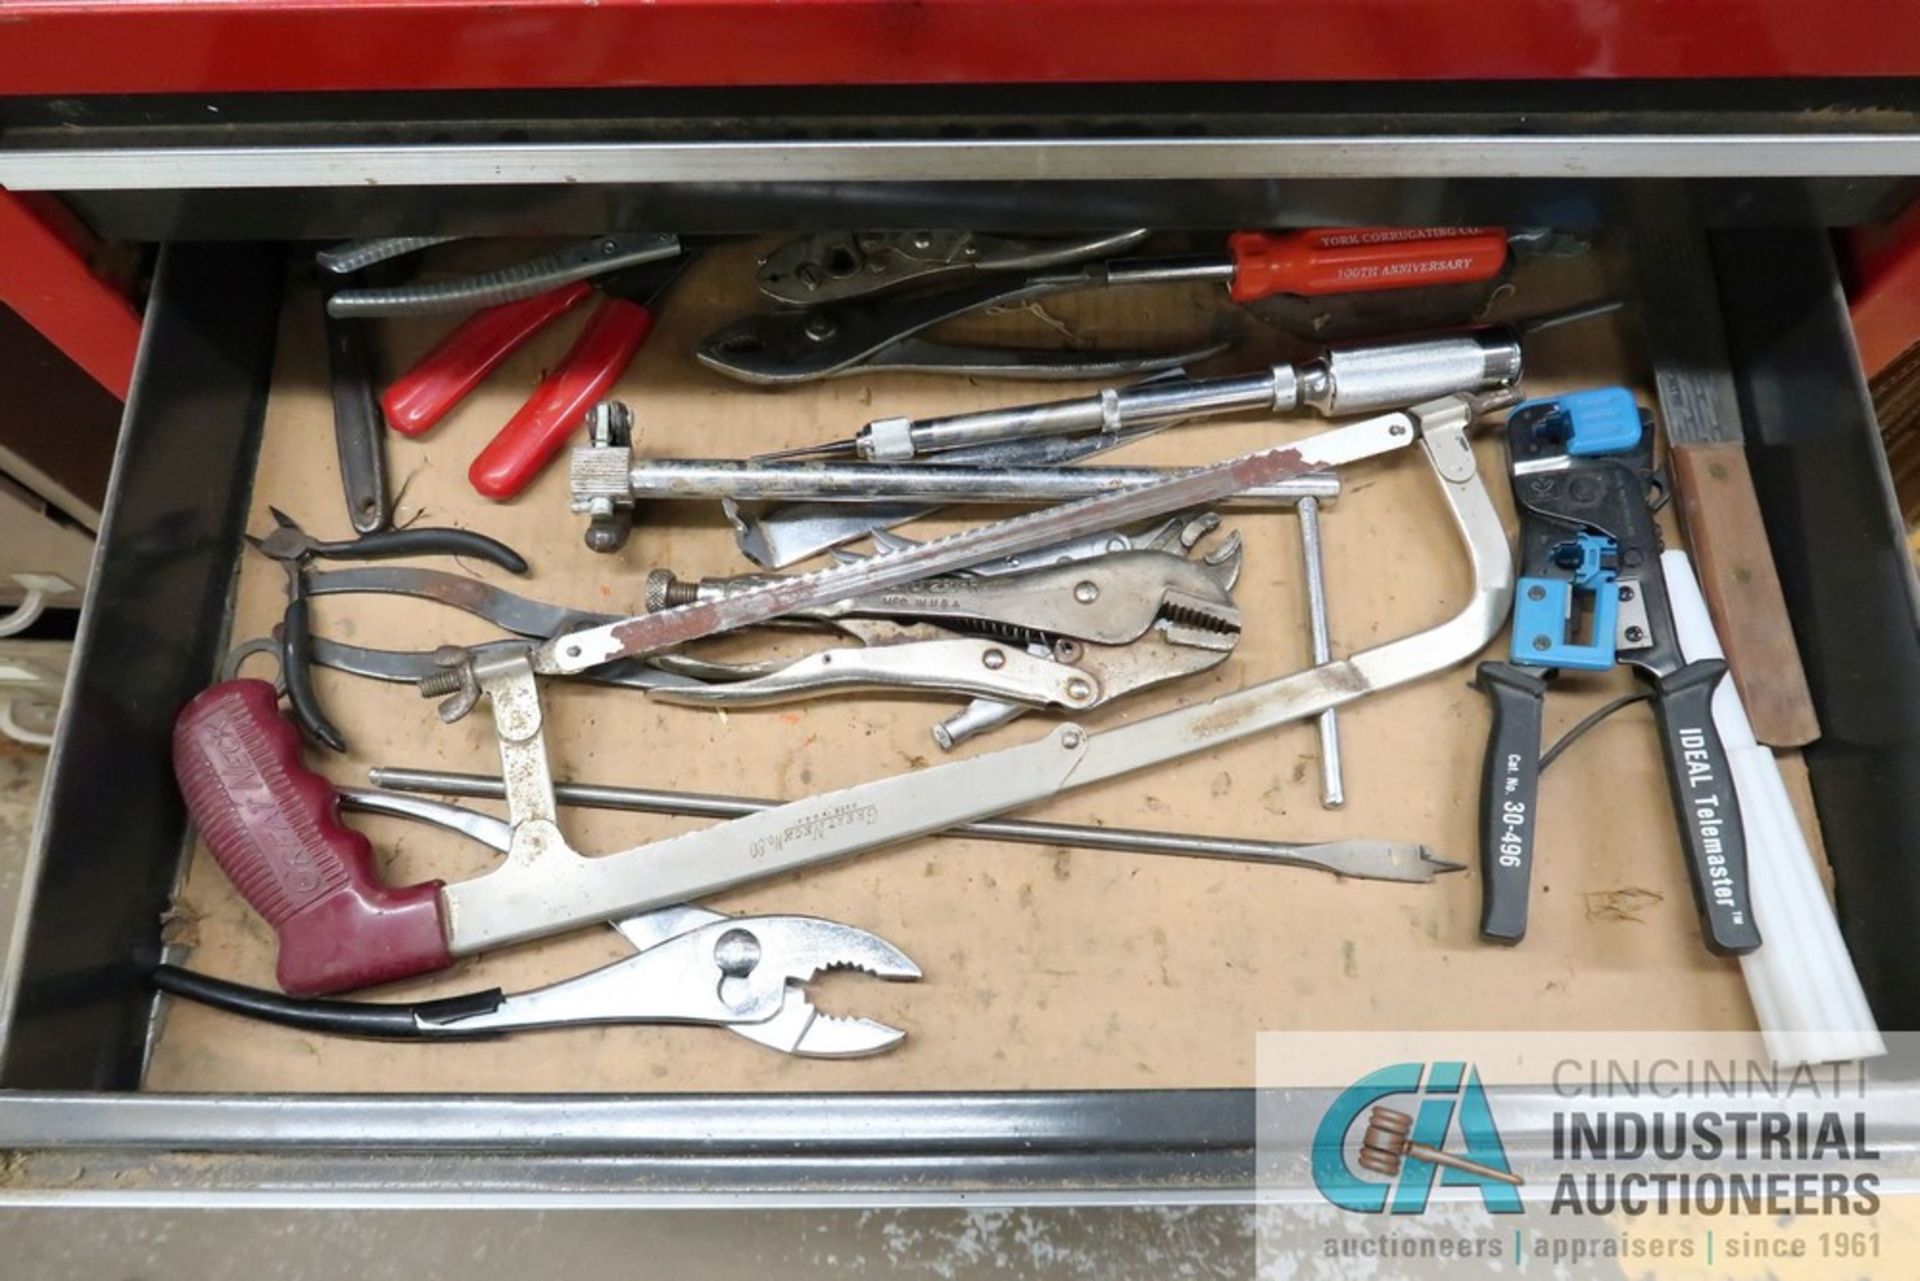 (LOT) MISCELLANEOUS HAND TOOLS, TOOL BOXES AND BENCHES - Image 8 of 10